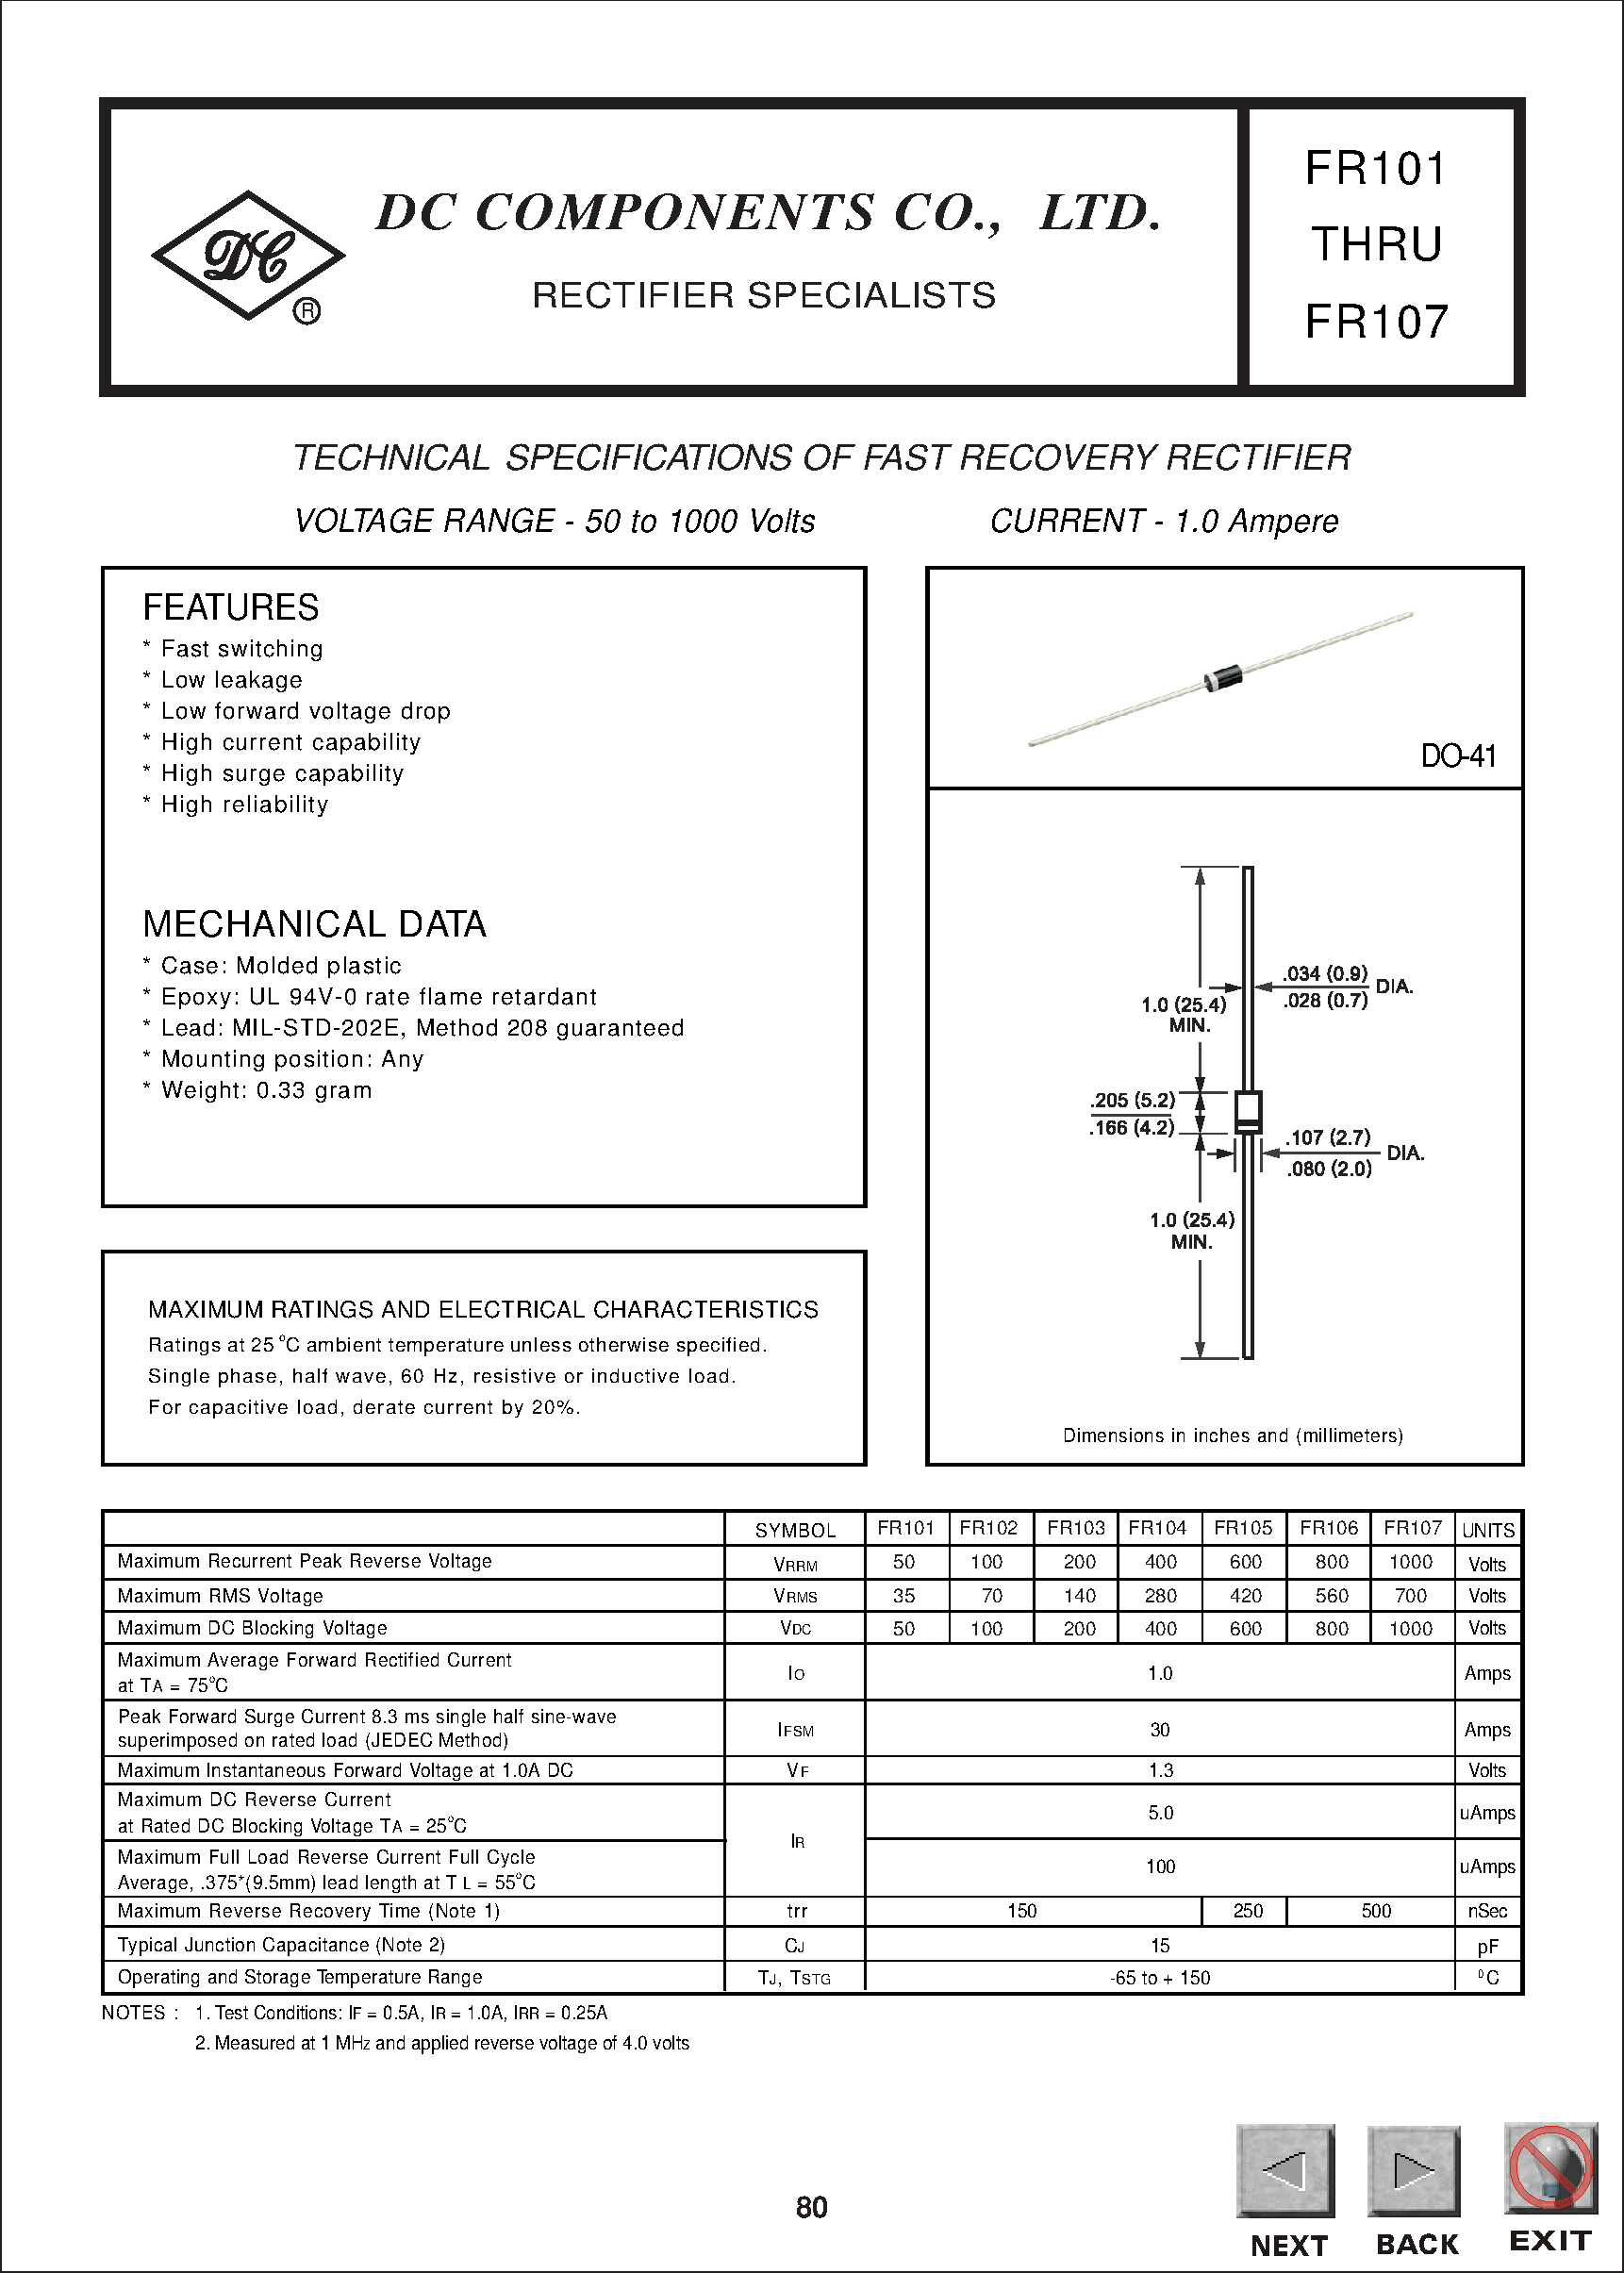 Даташит FR101 - TECHNICAL SPECIFICATIONS OF FAST RECOVERY RECTIFIER страница 1